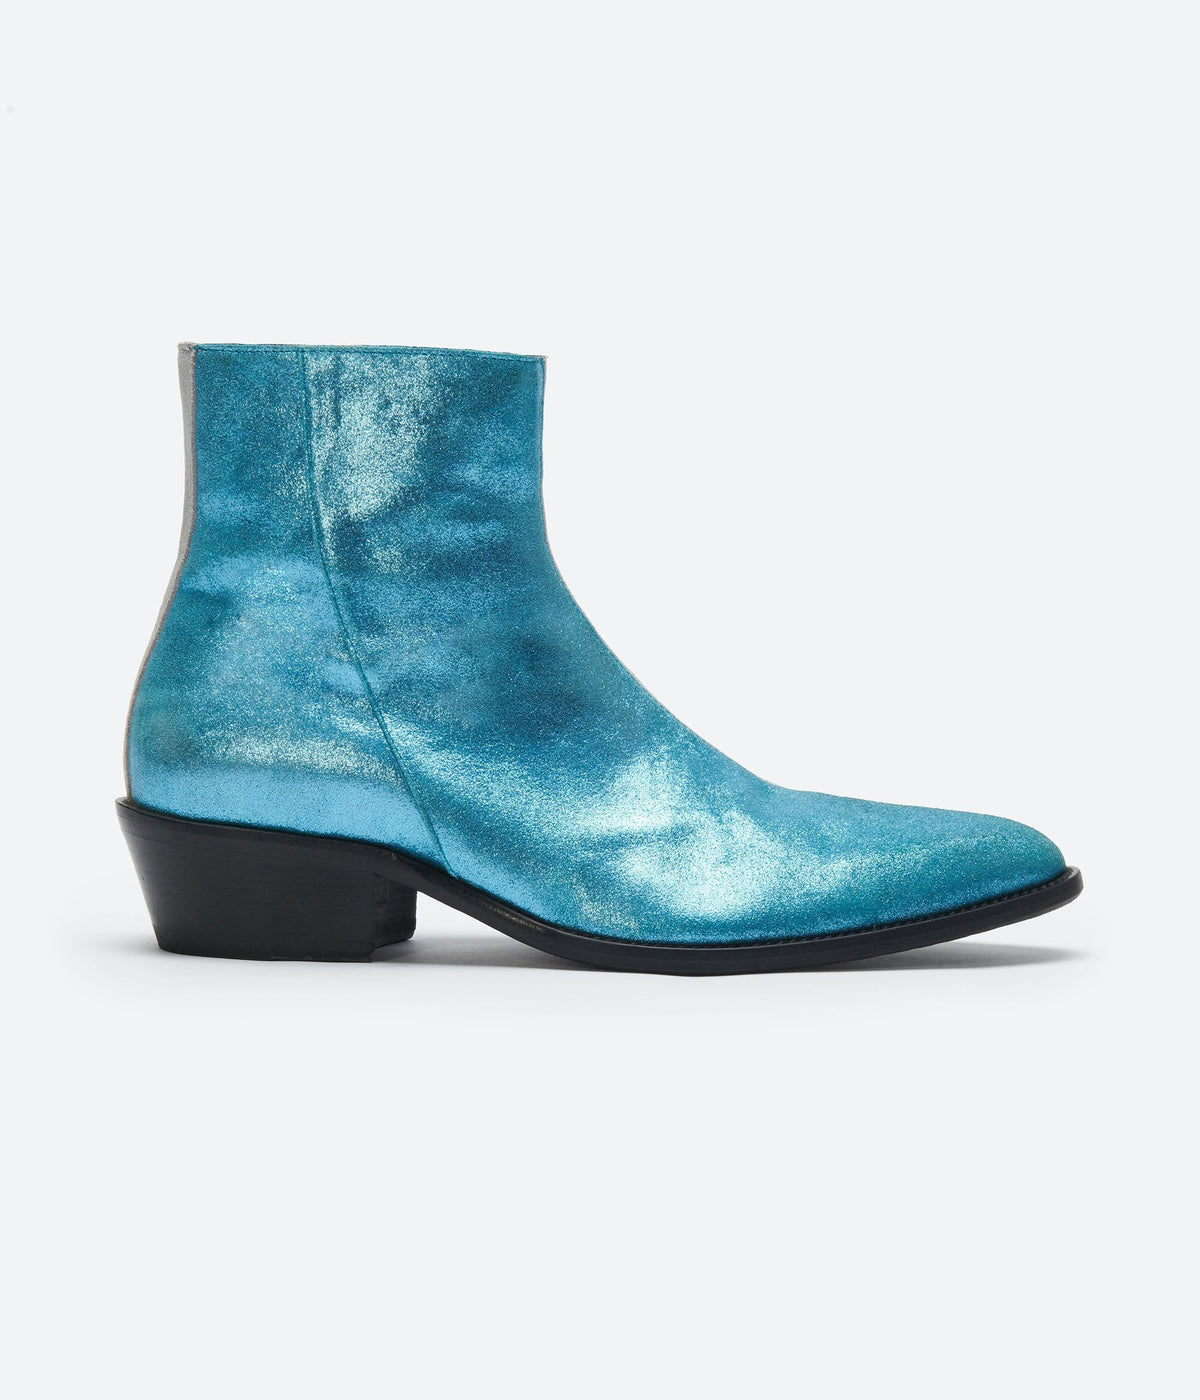 HUMAN RECREATIONAL SERVICES LUTHER BOOT IN BLUE AND GREY ITALIAN LEATHER